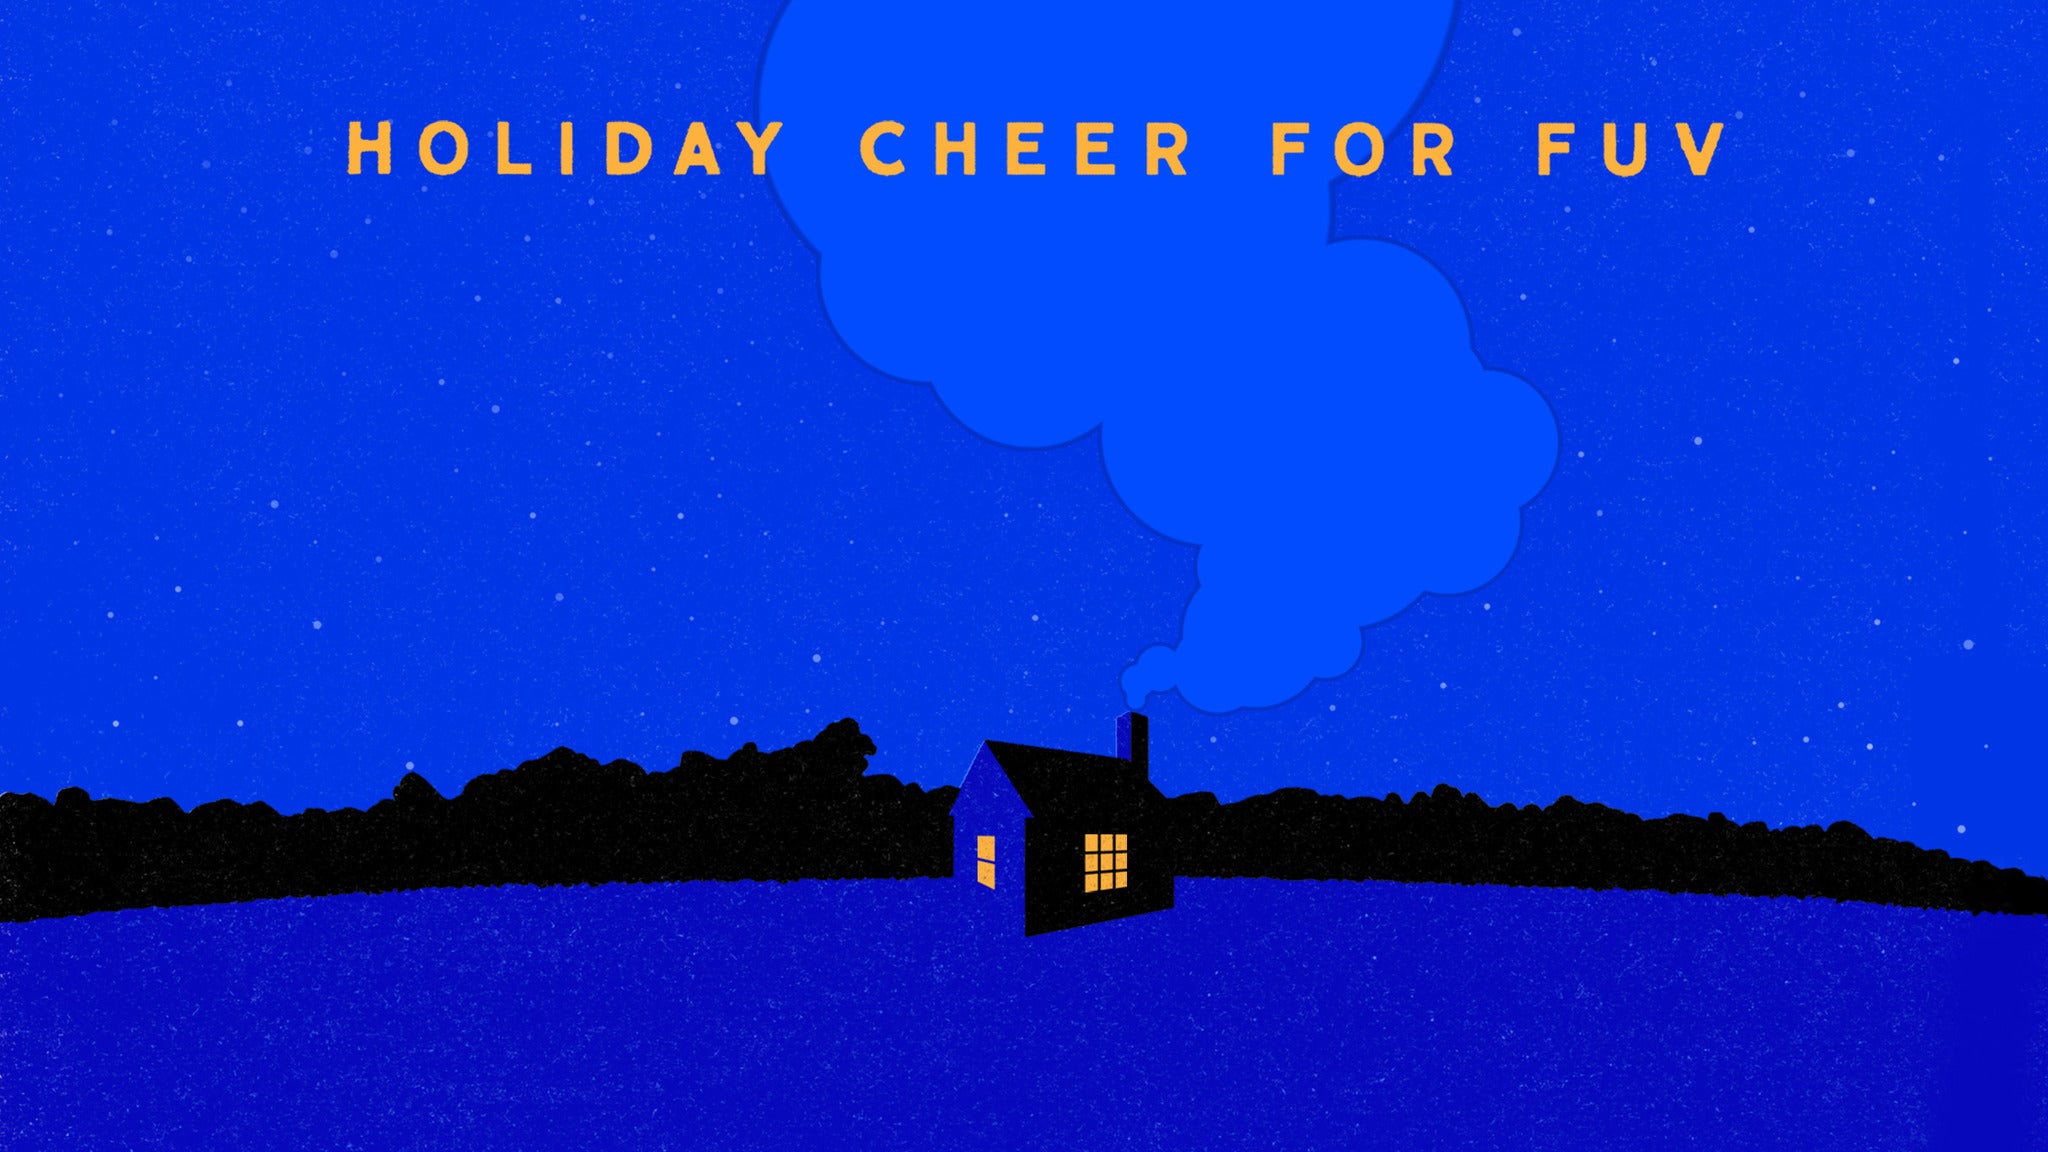 Holiday Cheer for FUV in New York promo photo for Local presale offer code